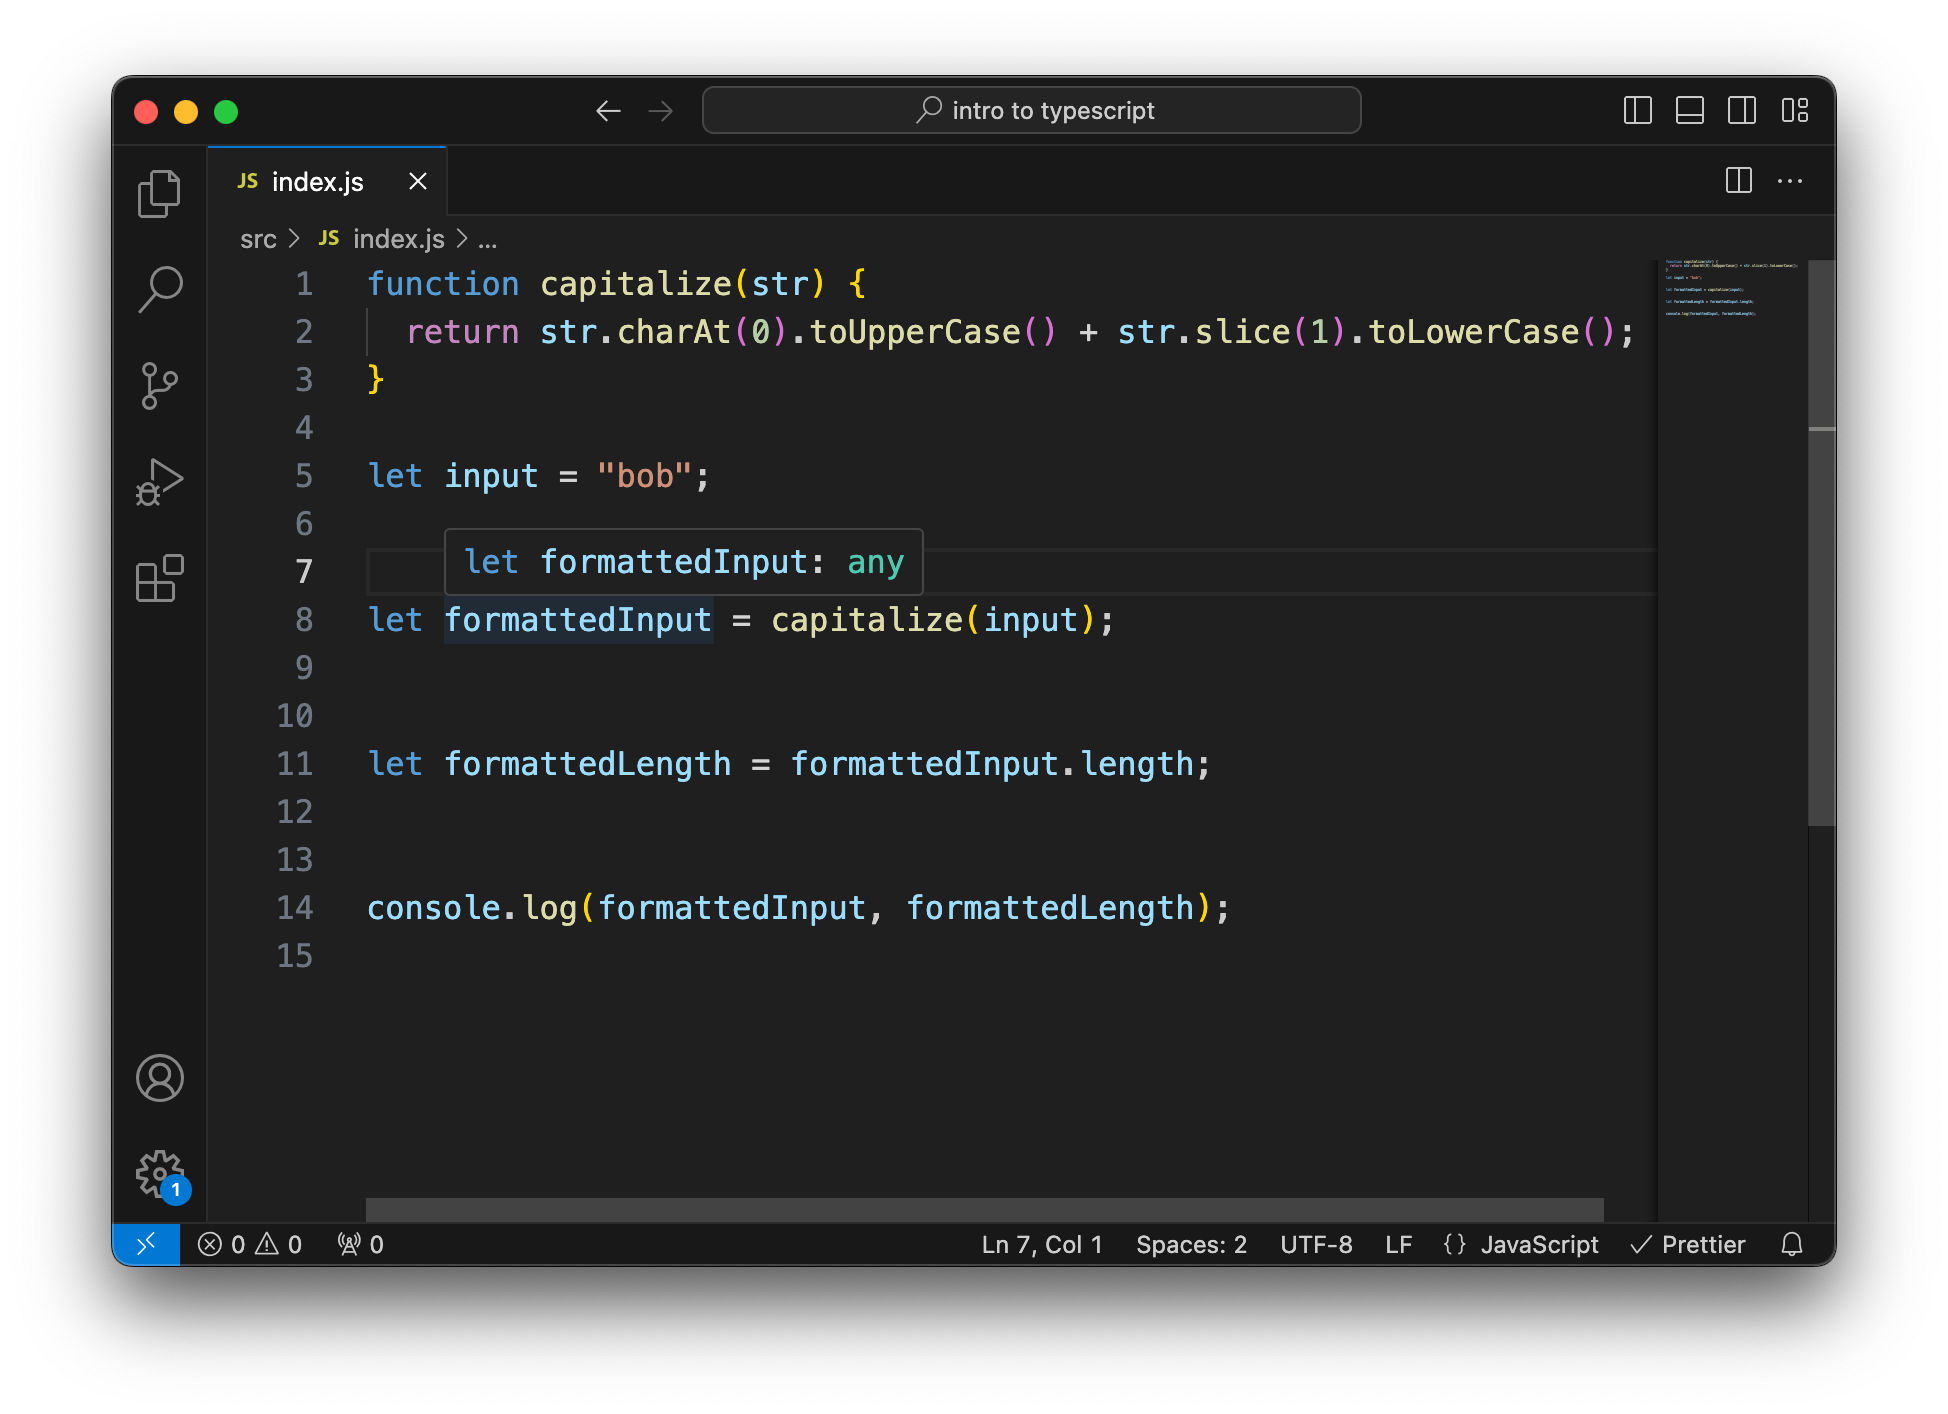 VS Code with a simple JavaScript code. First, we define a simple function that capitalizes a string, then we use this function to capitalize a string. The image shows that when you hover over the returned value, now its type is of type 'any'.